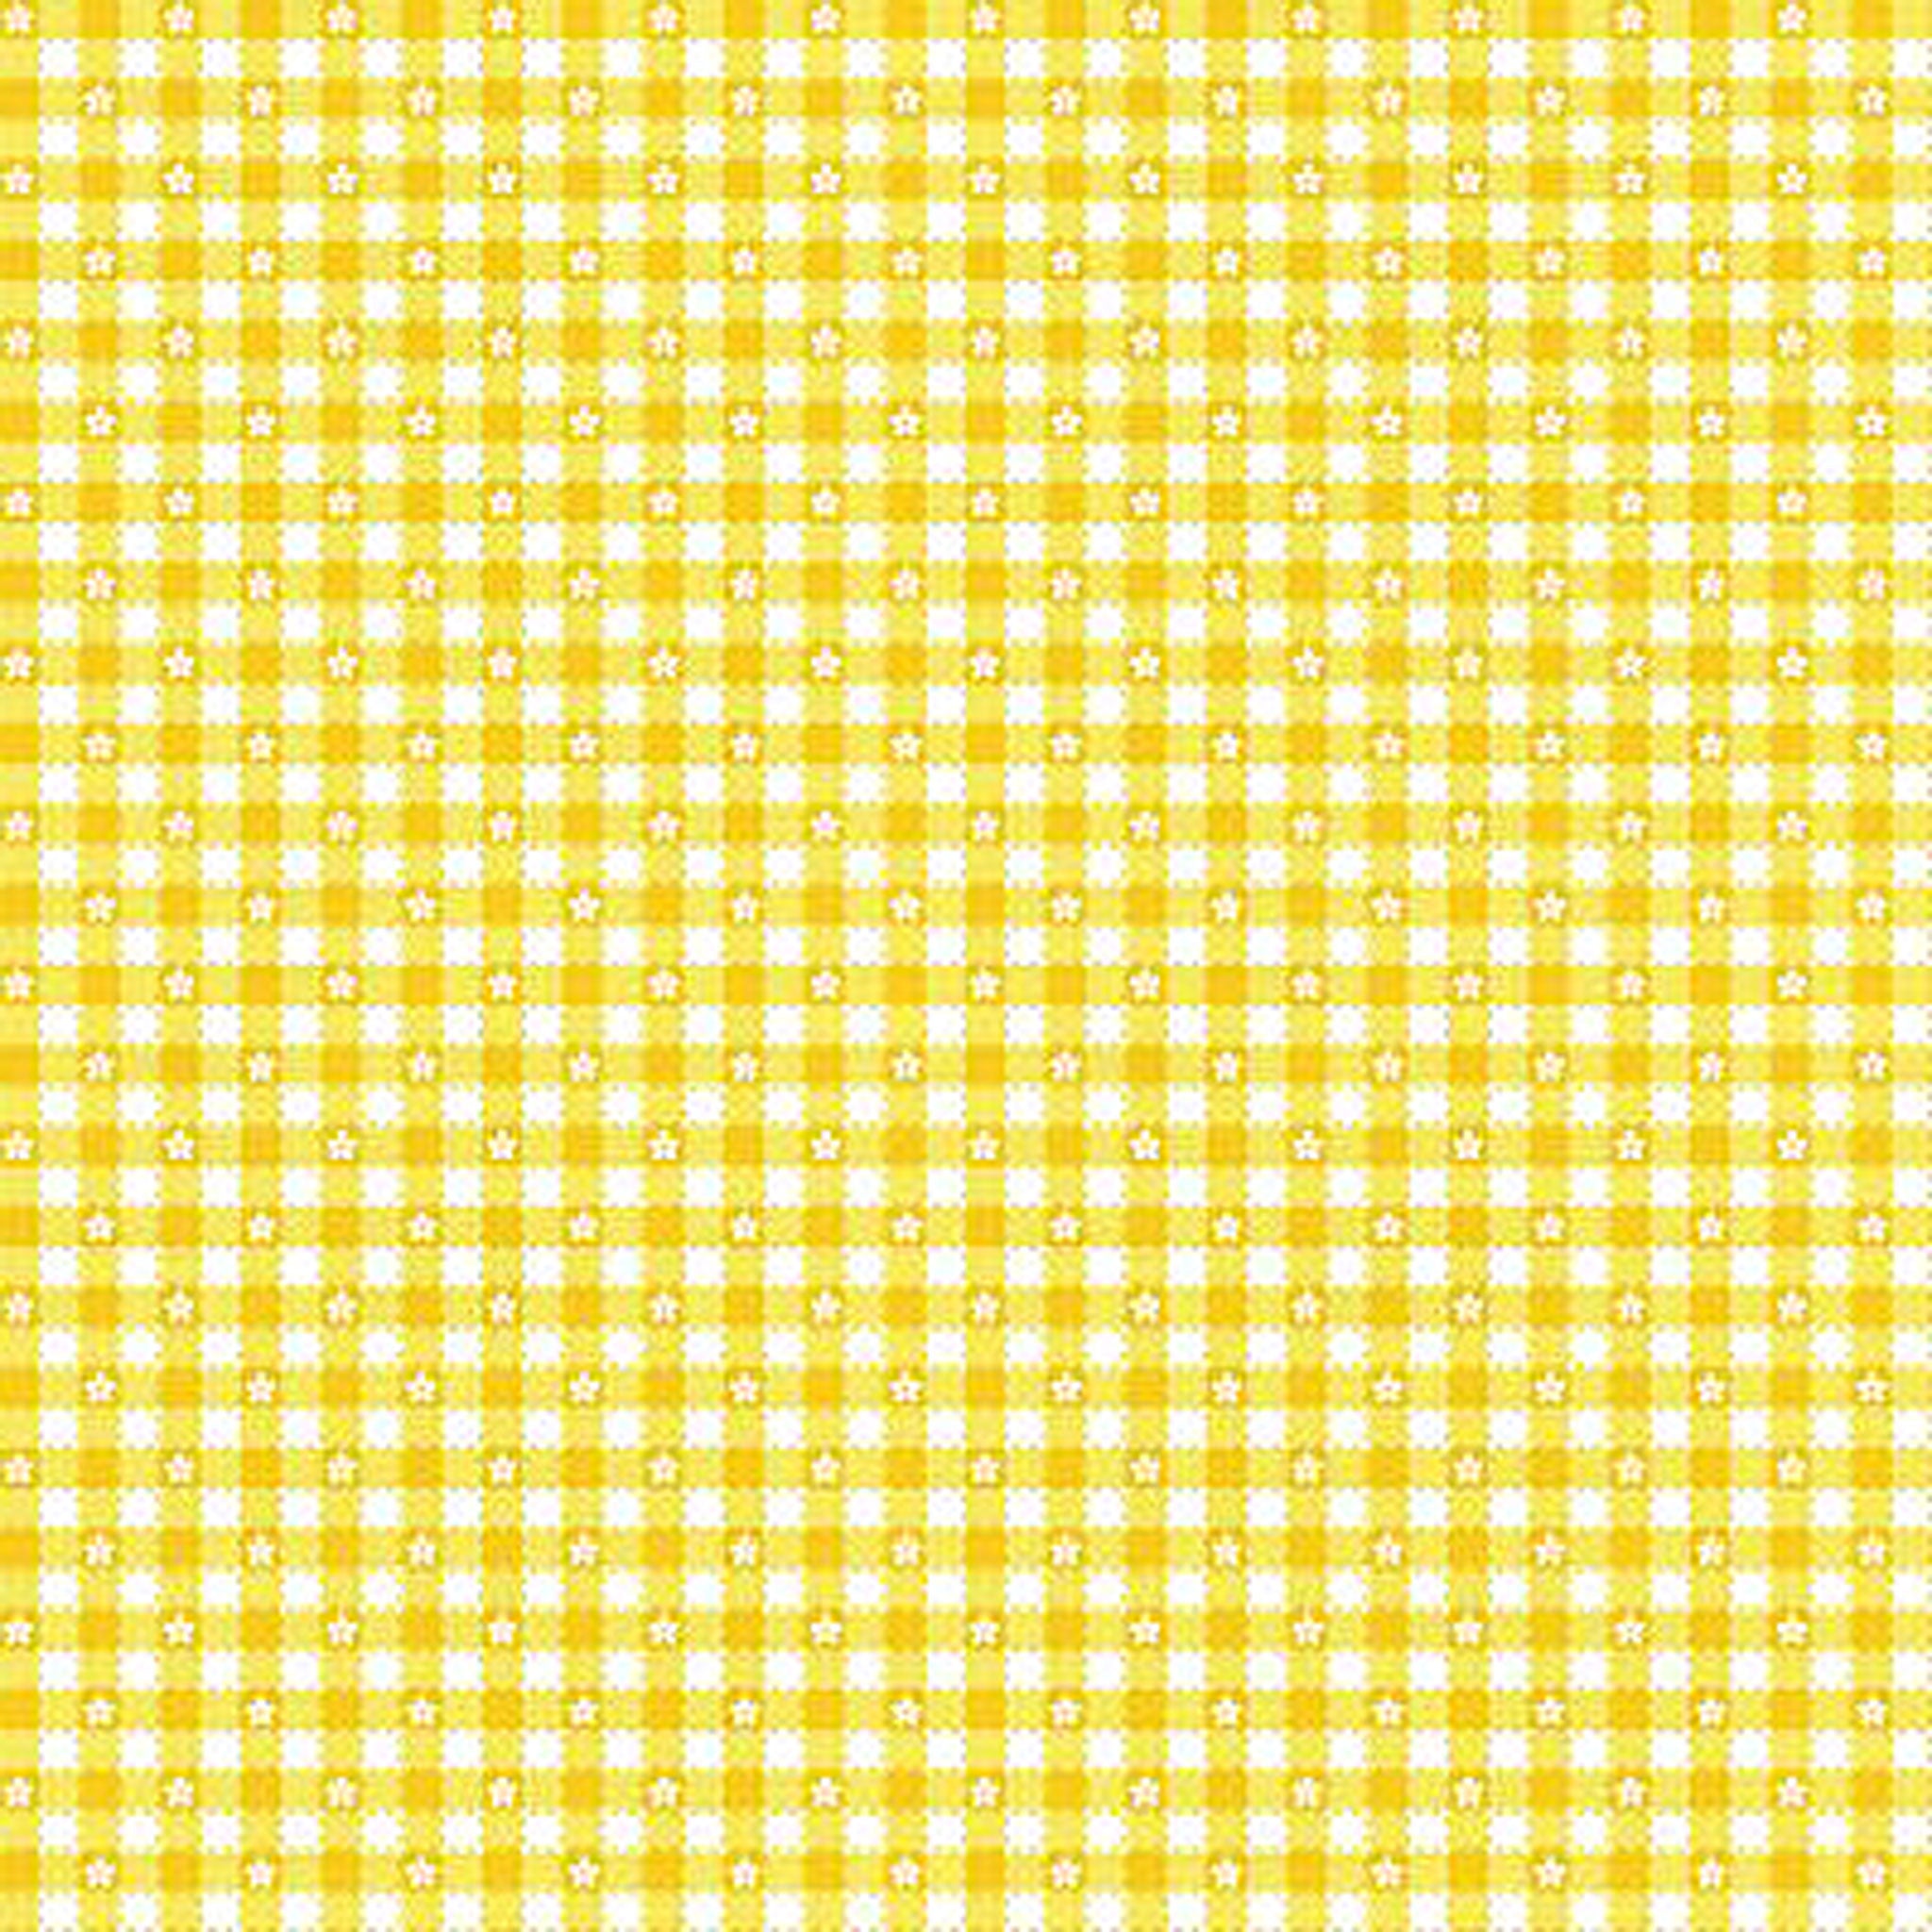 Floral Gingham Cotton Fabric - Yellow - Makower 2553/Y - Summer Days